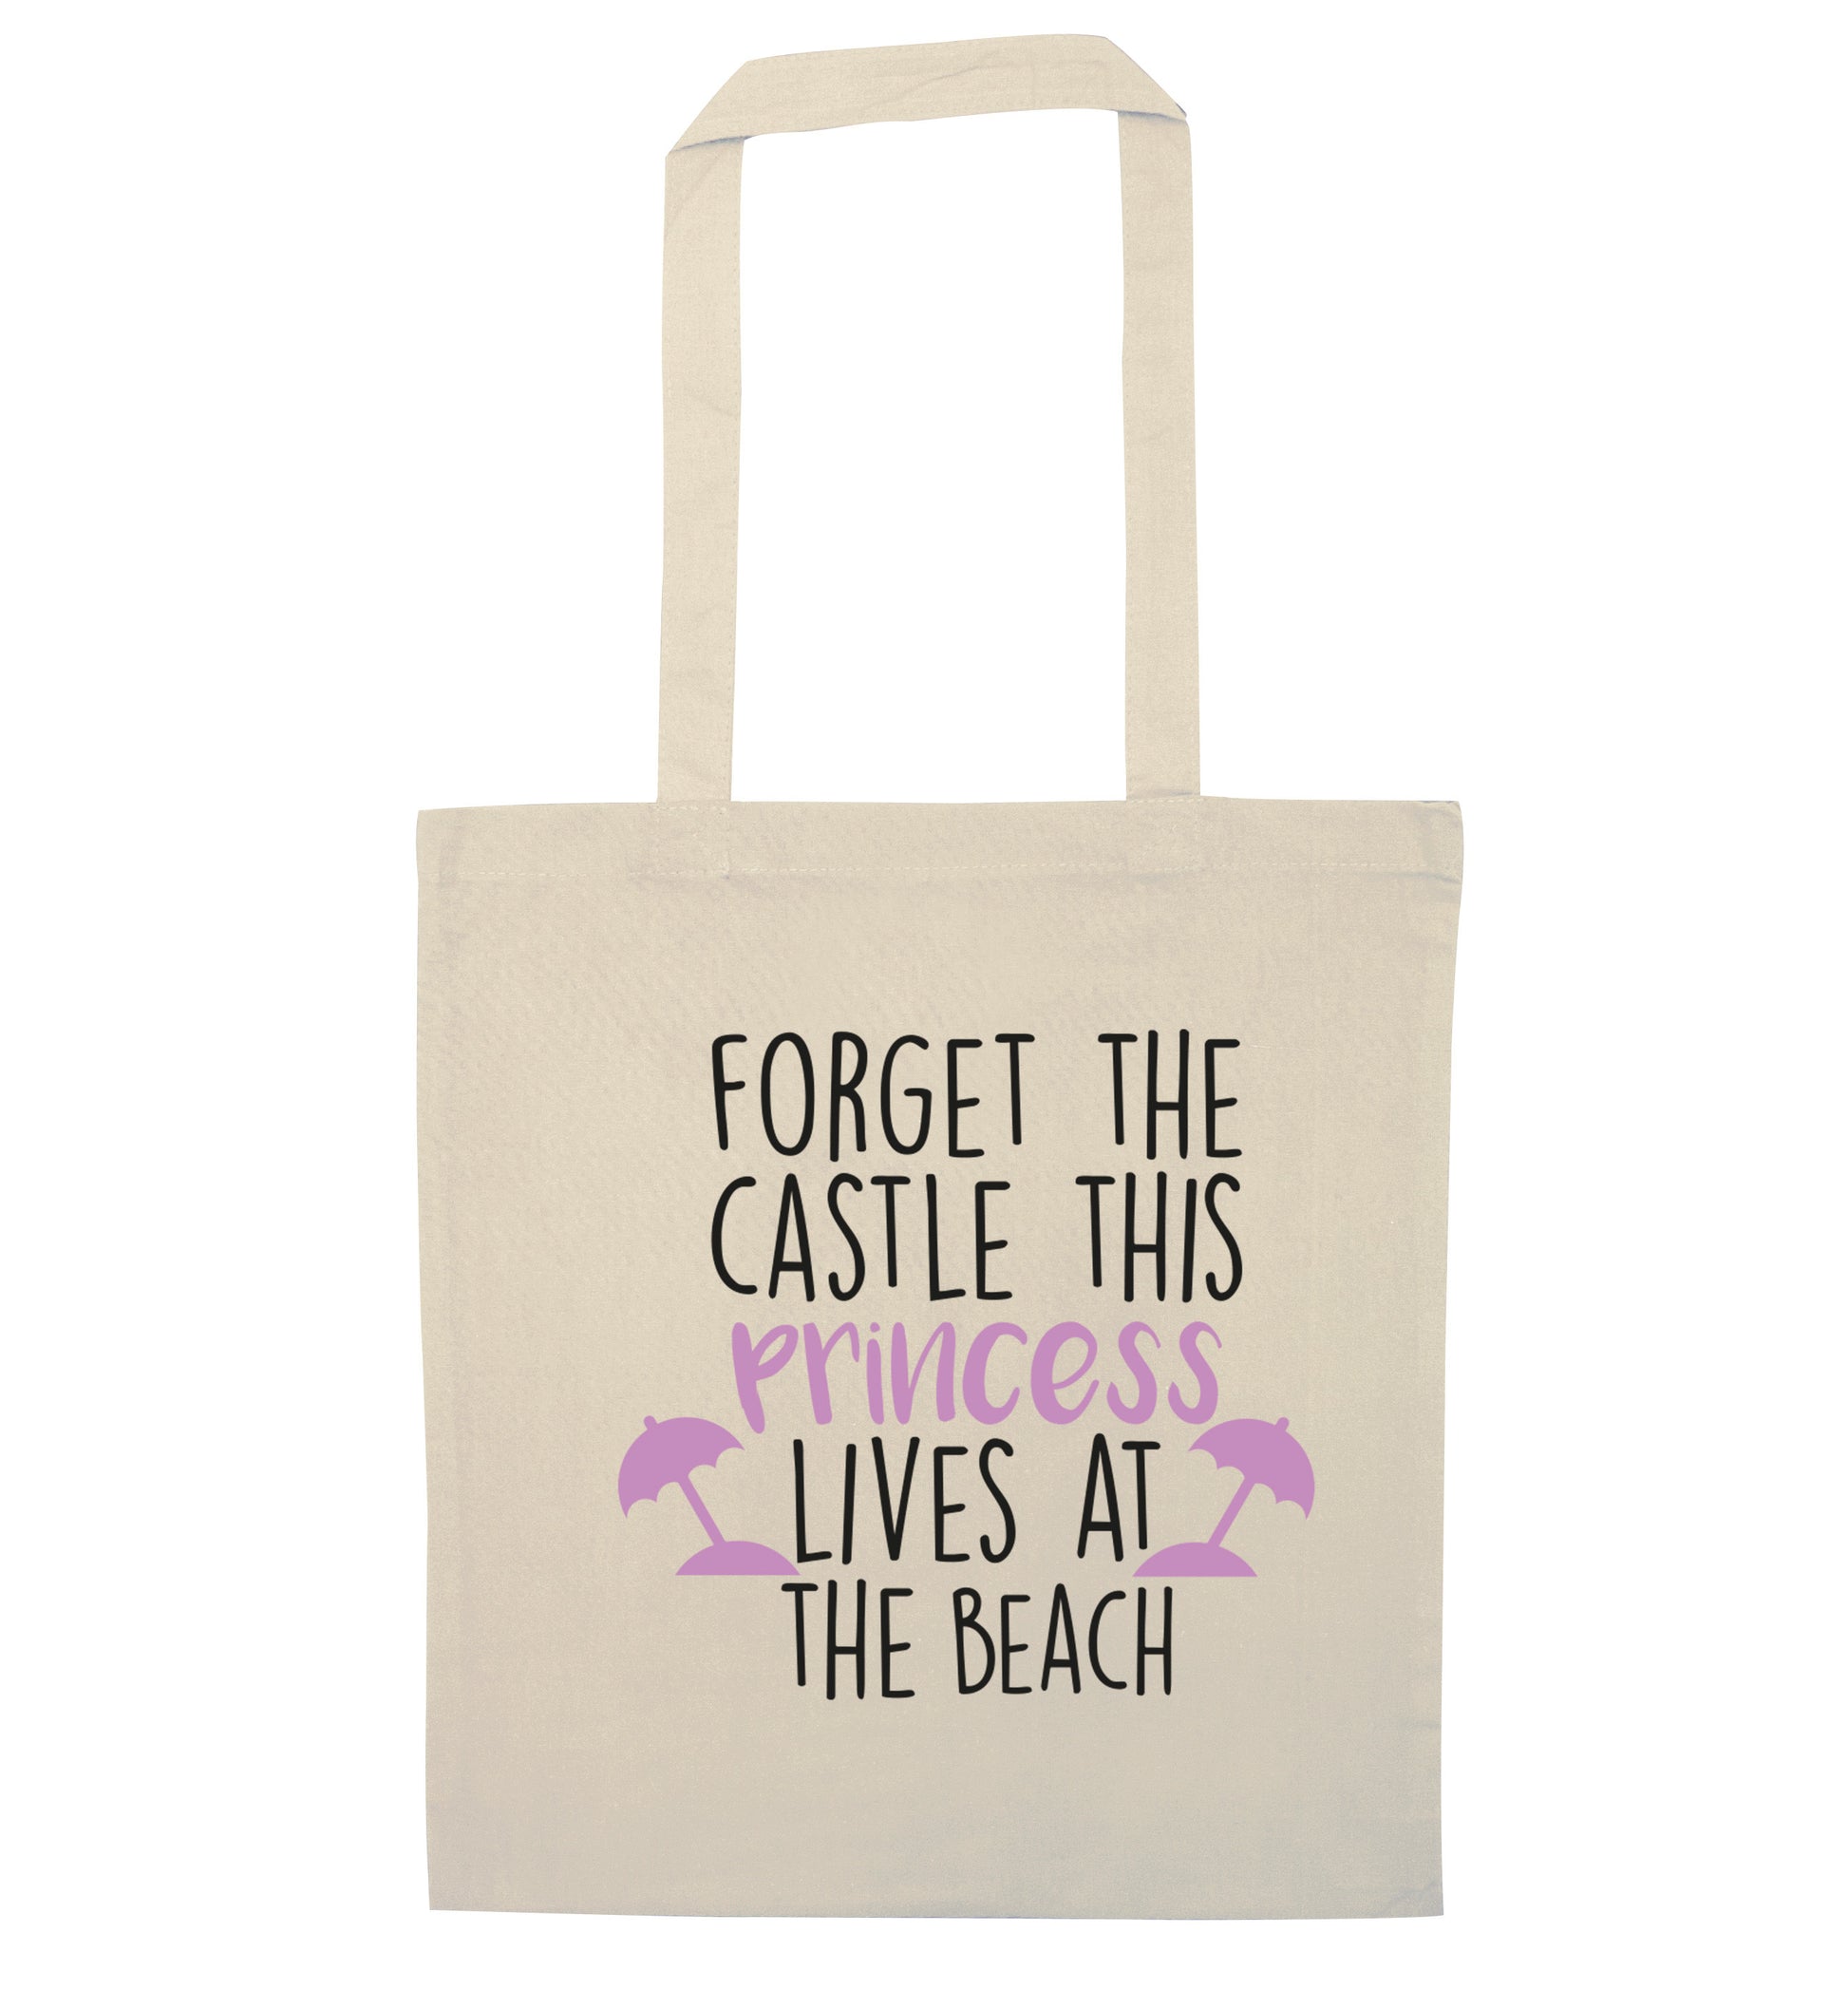 Forget the castle this princess lives at the beach natural tote bag